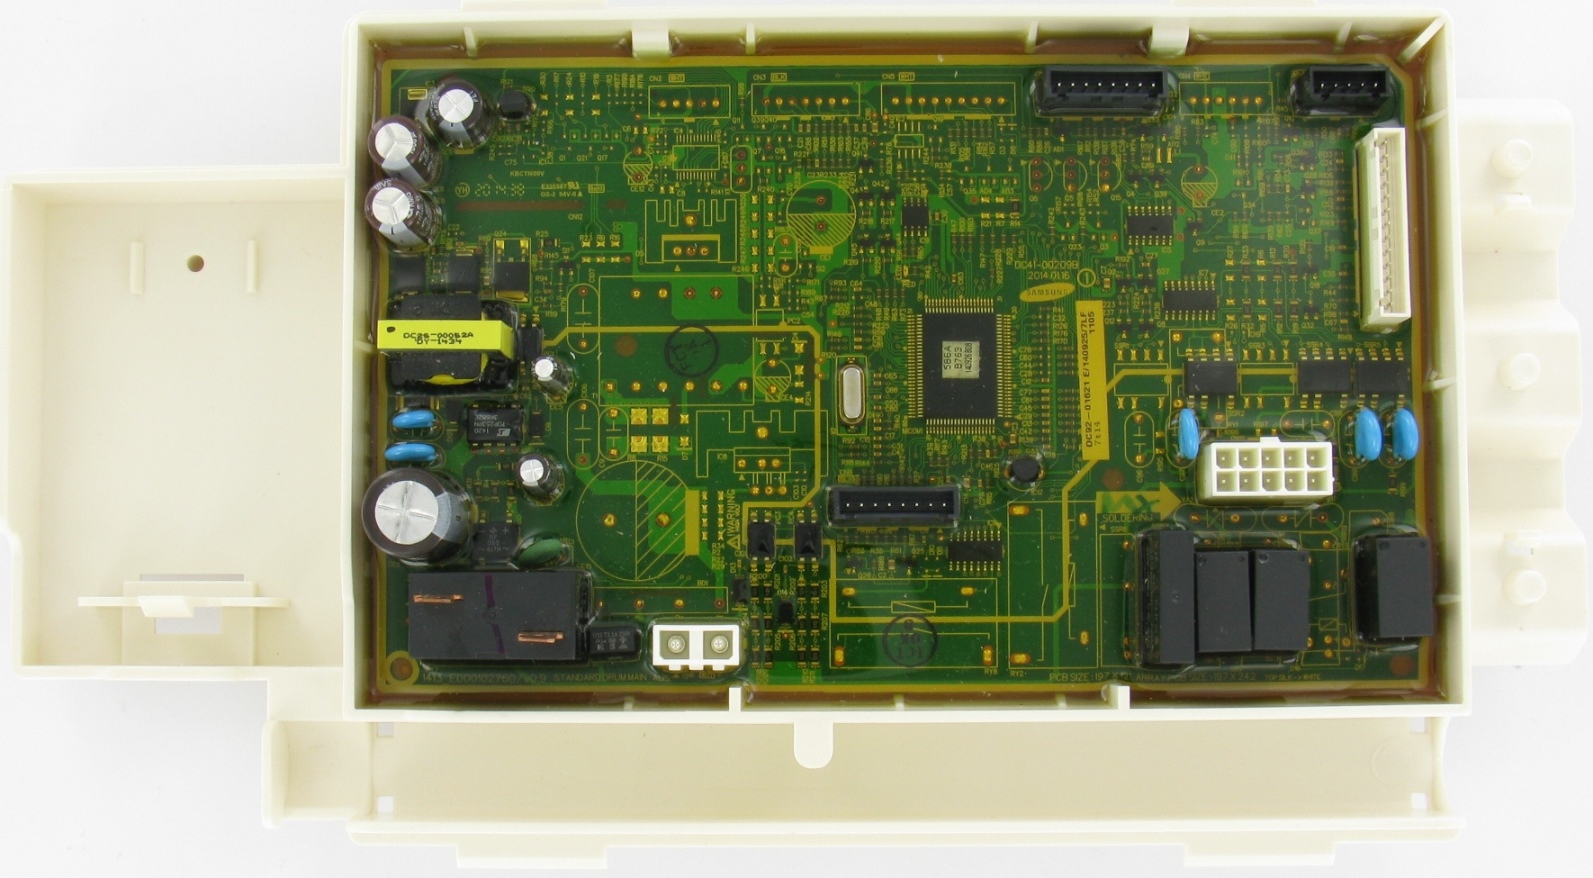 Samsung DC92-01621E Washer Electronic Control Board for sale online